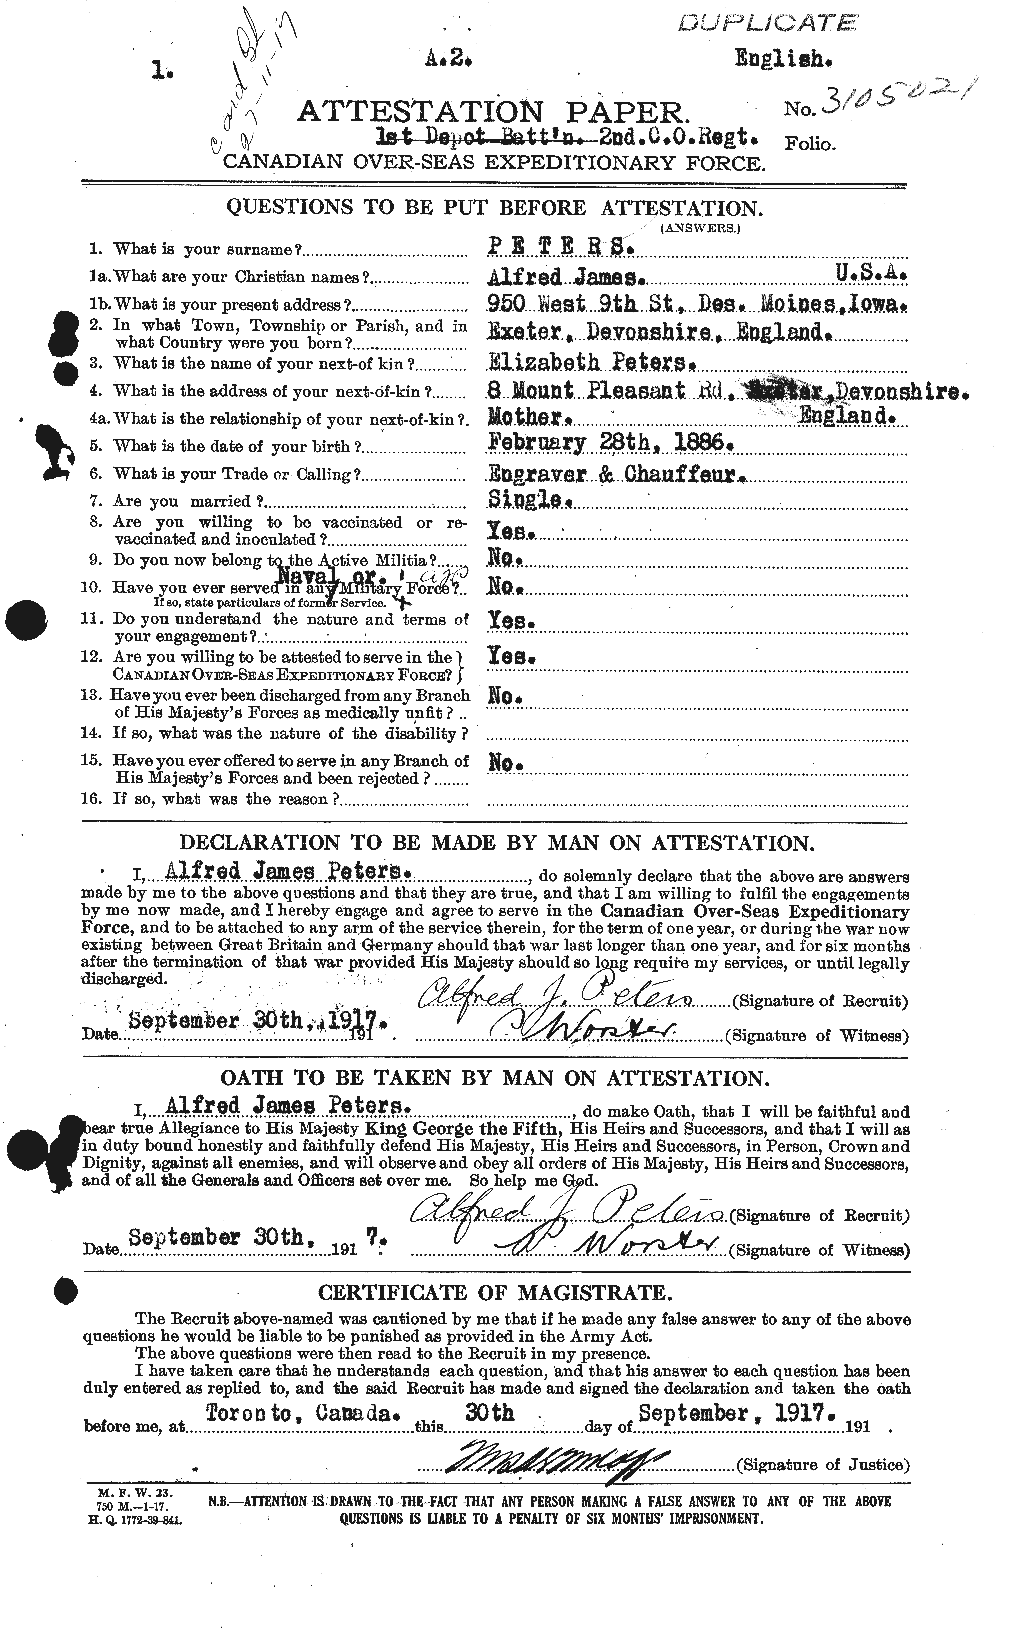 Personnel Records of the First World War - CEF 575340a